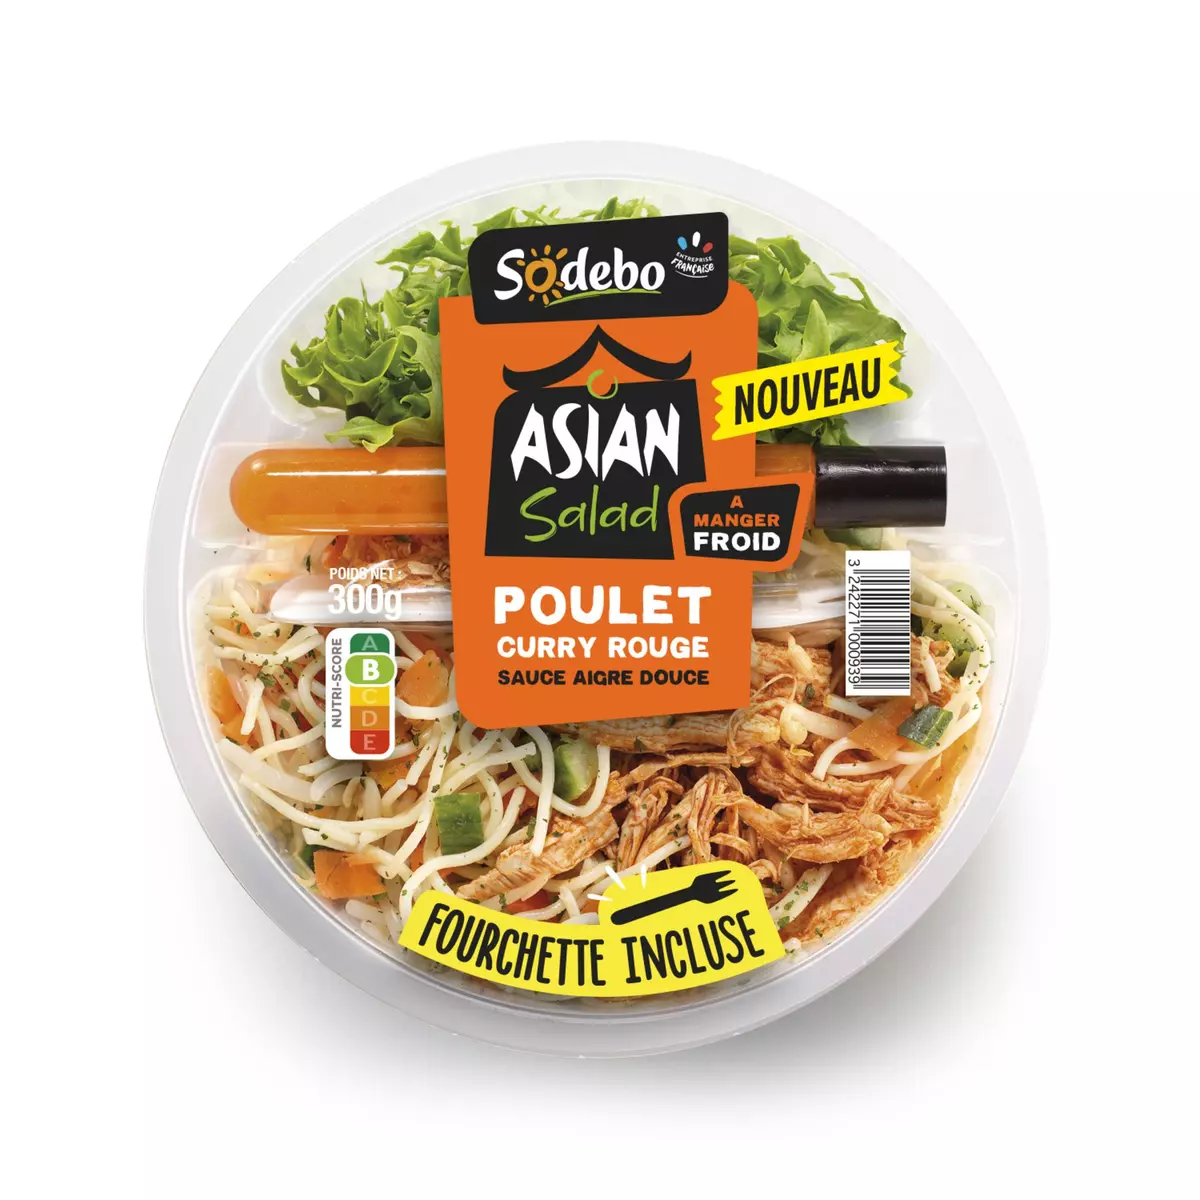 SODEBO Asian salad poulet curry rouge sauce aigre douce 1 portion 300g